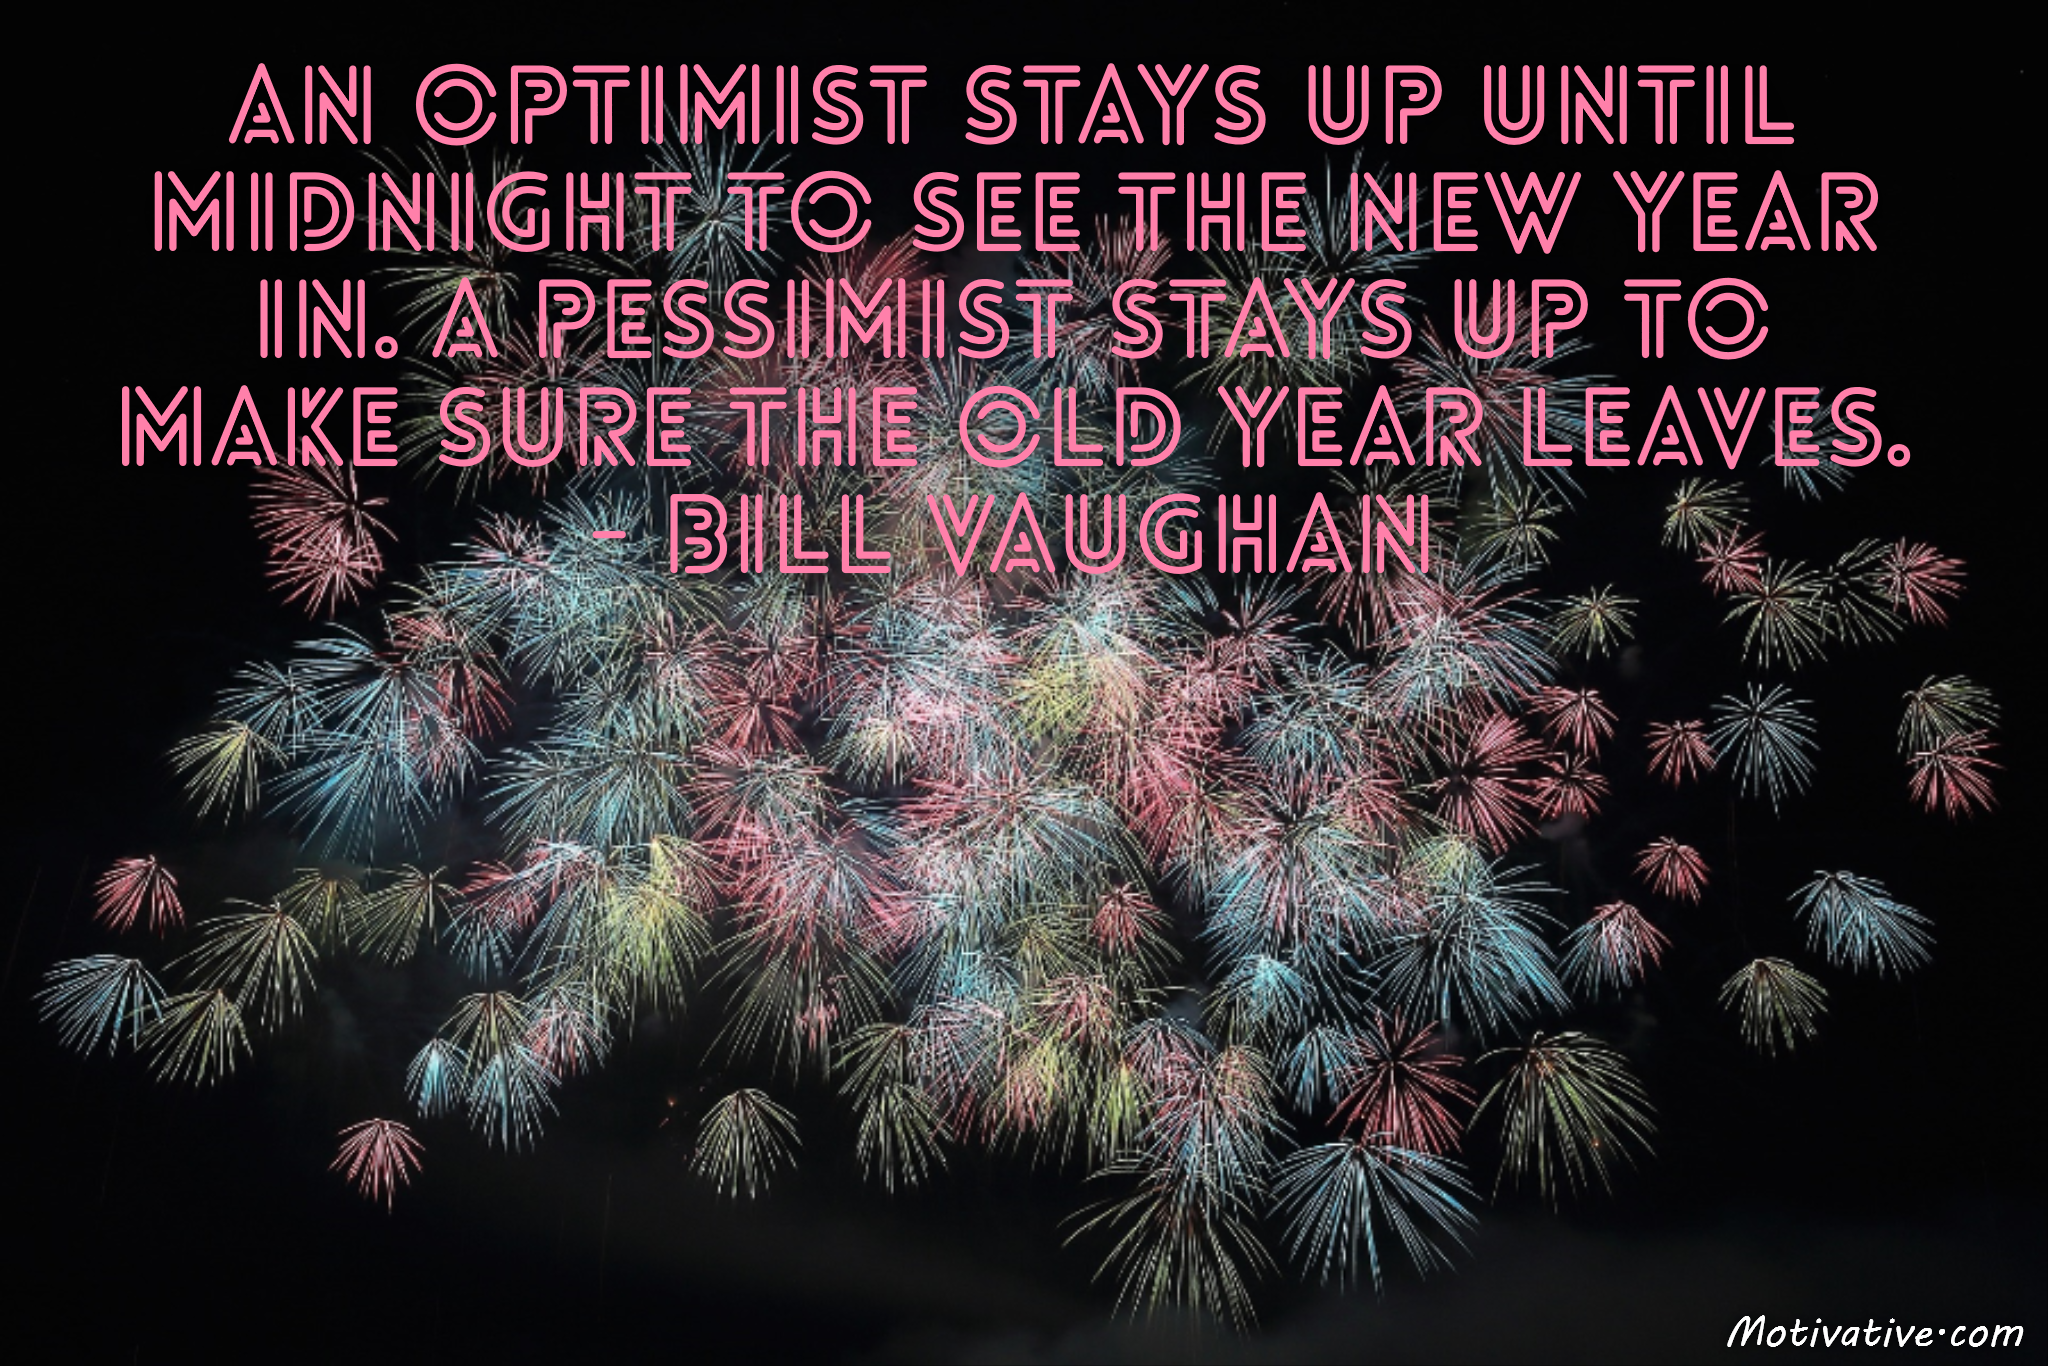 An optimist stays up until midnight to see the new year in. A pessimist stays up to make sure the old year leaves. – Bill Vaughan